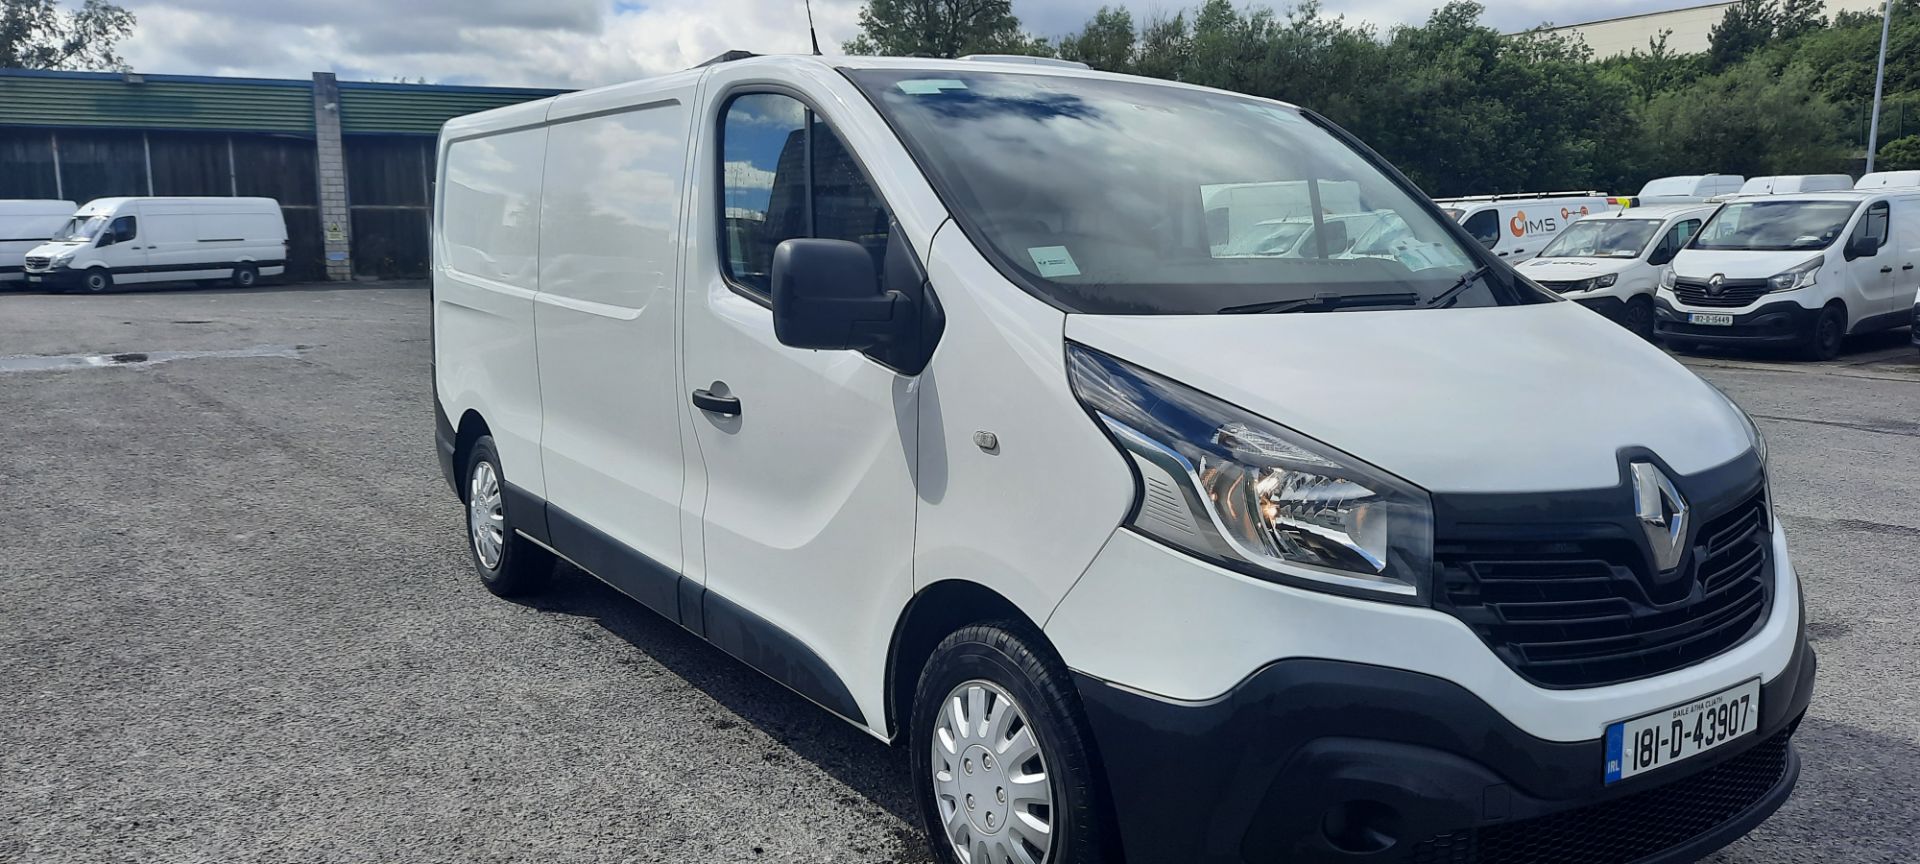 2018 Renault Trafic LL29 DCI 120 Business 3DR (181D43907) Thumbnail 1